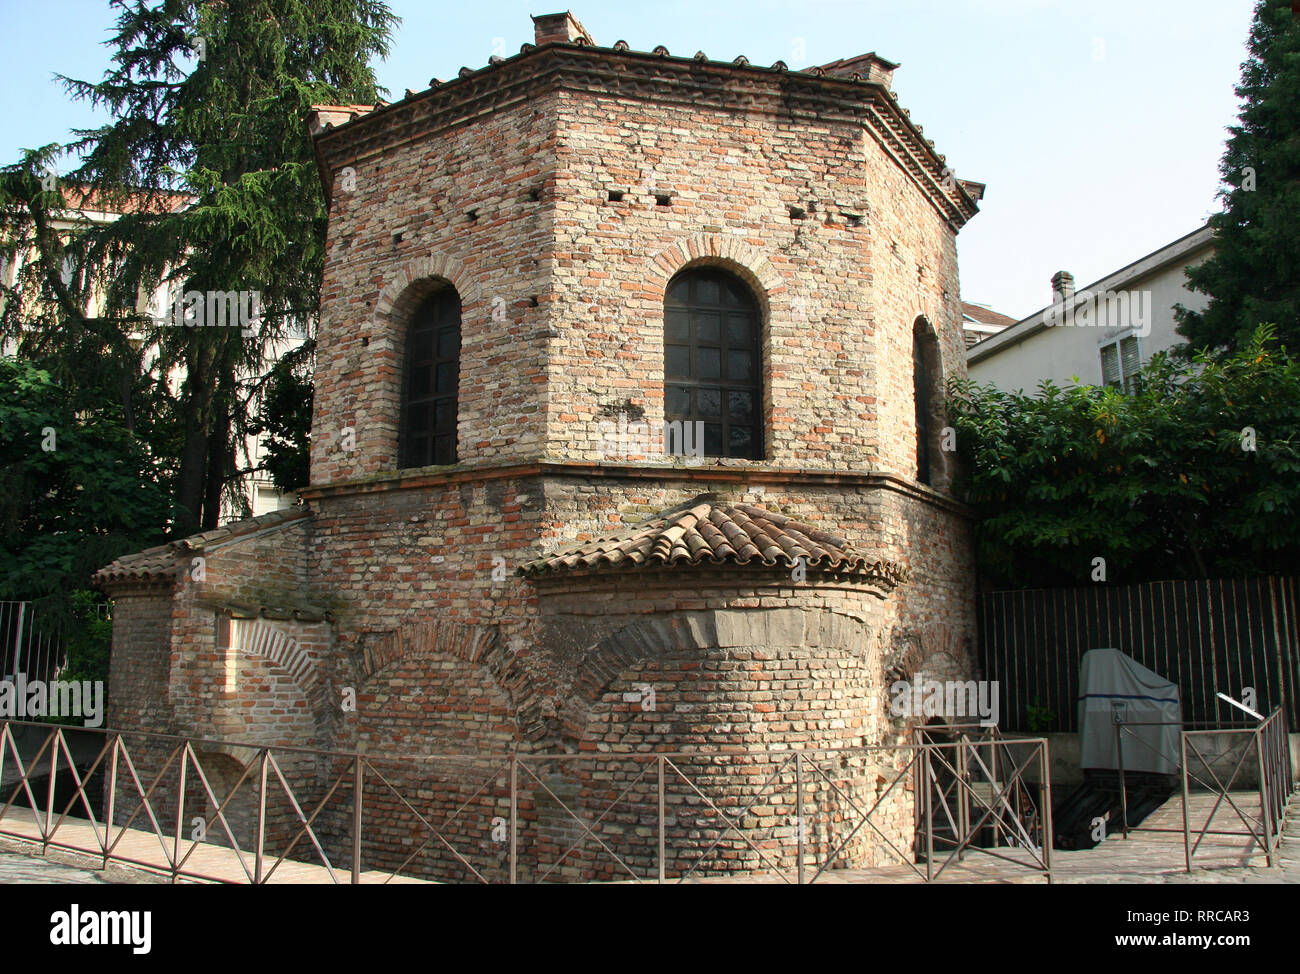 Italy. Ravenna. Arian Baptistery. Erected by Theodoric the Great 5th-6th cent. Exterior. Early Christians. Stock Photo